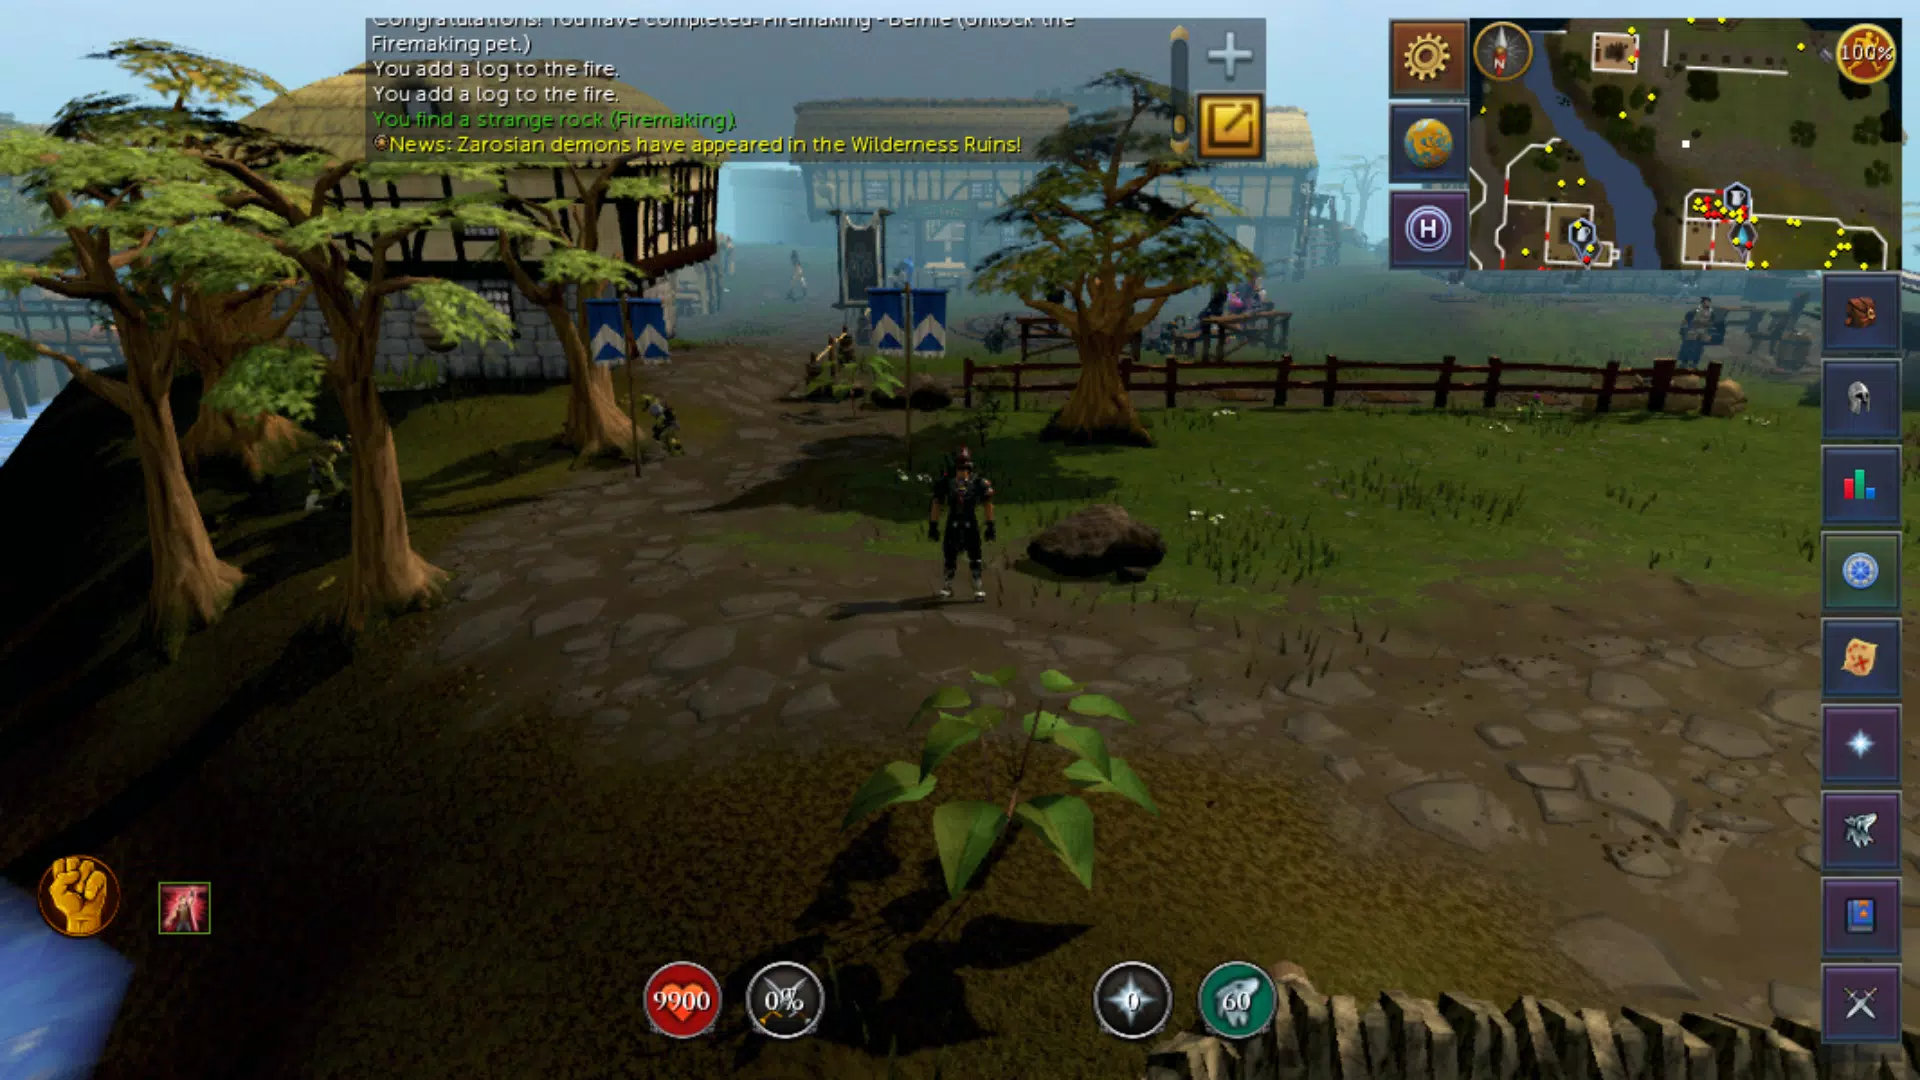 RuneScape APK Download for Android Free